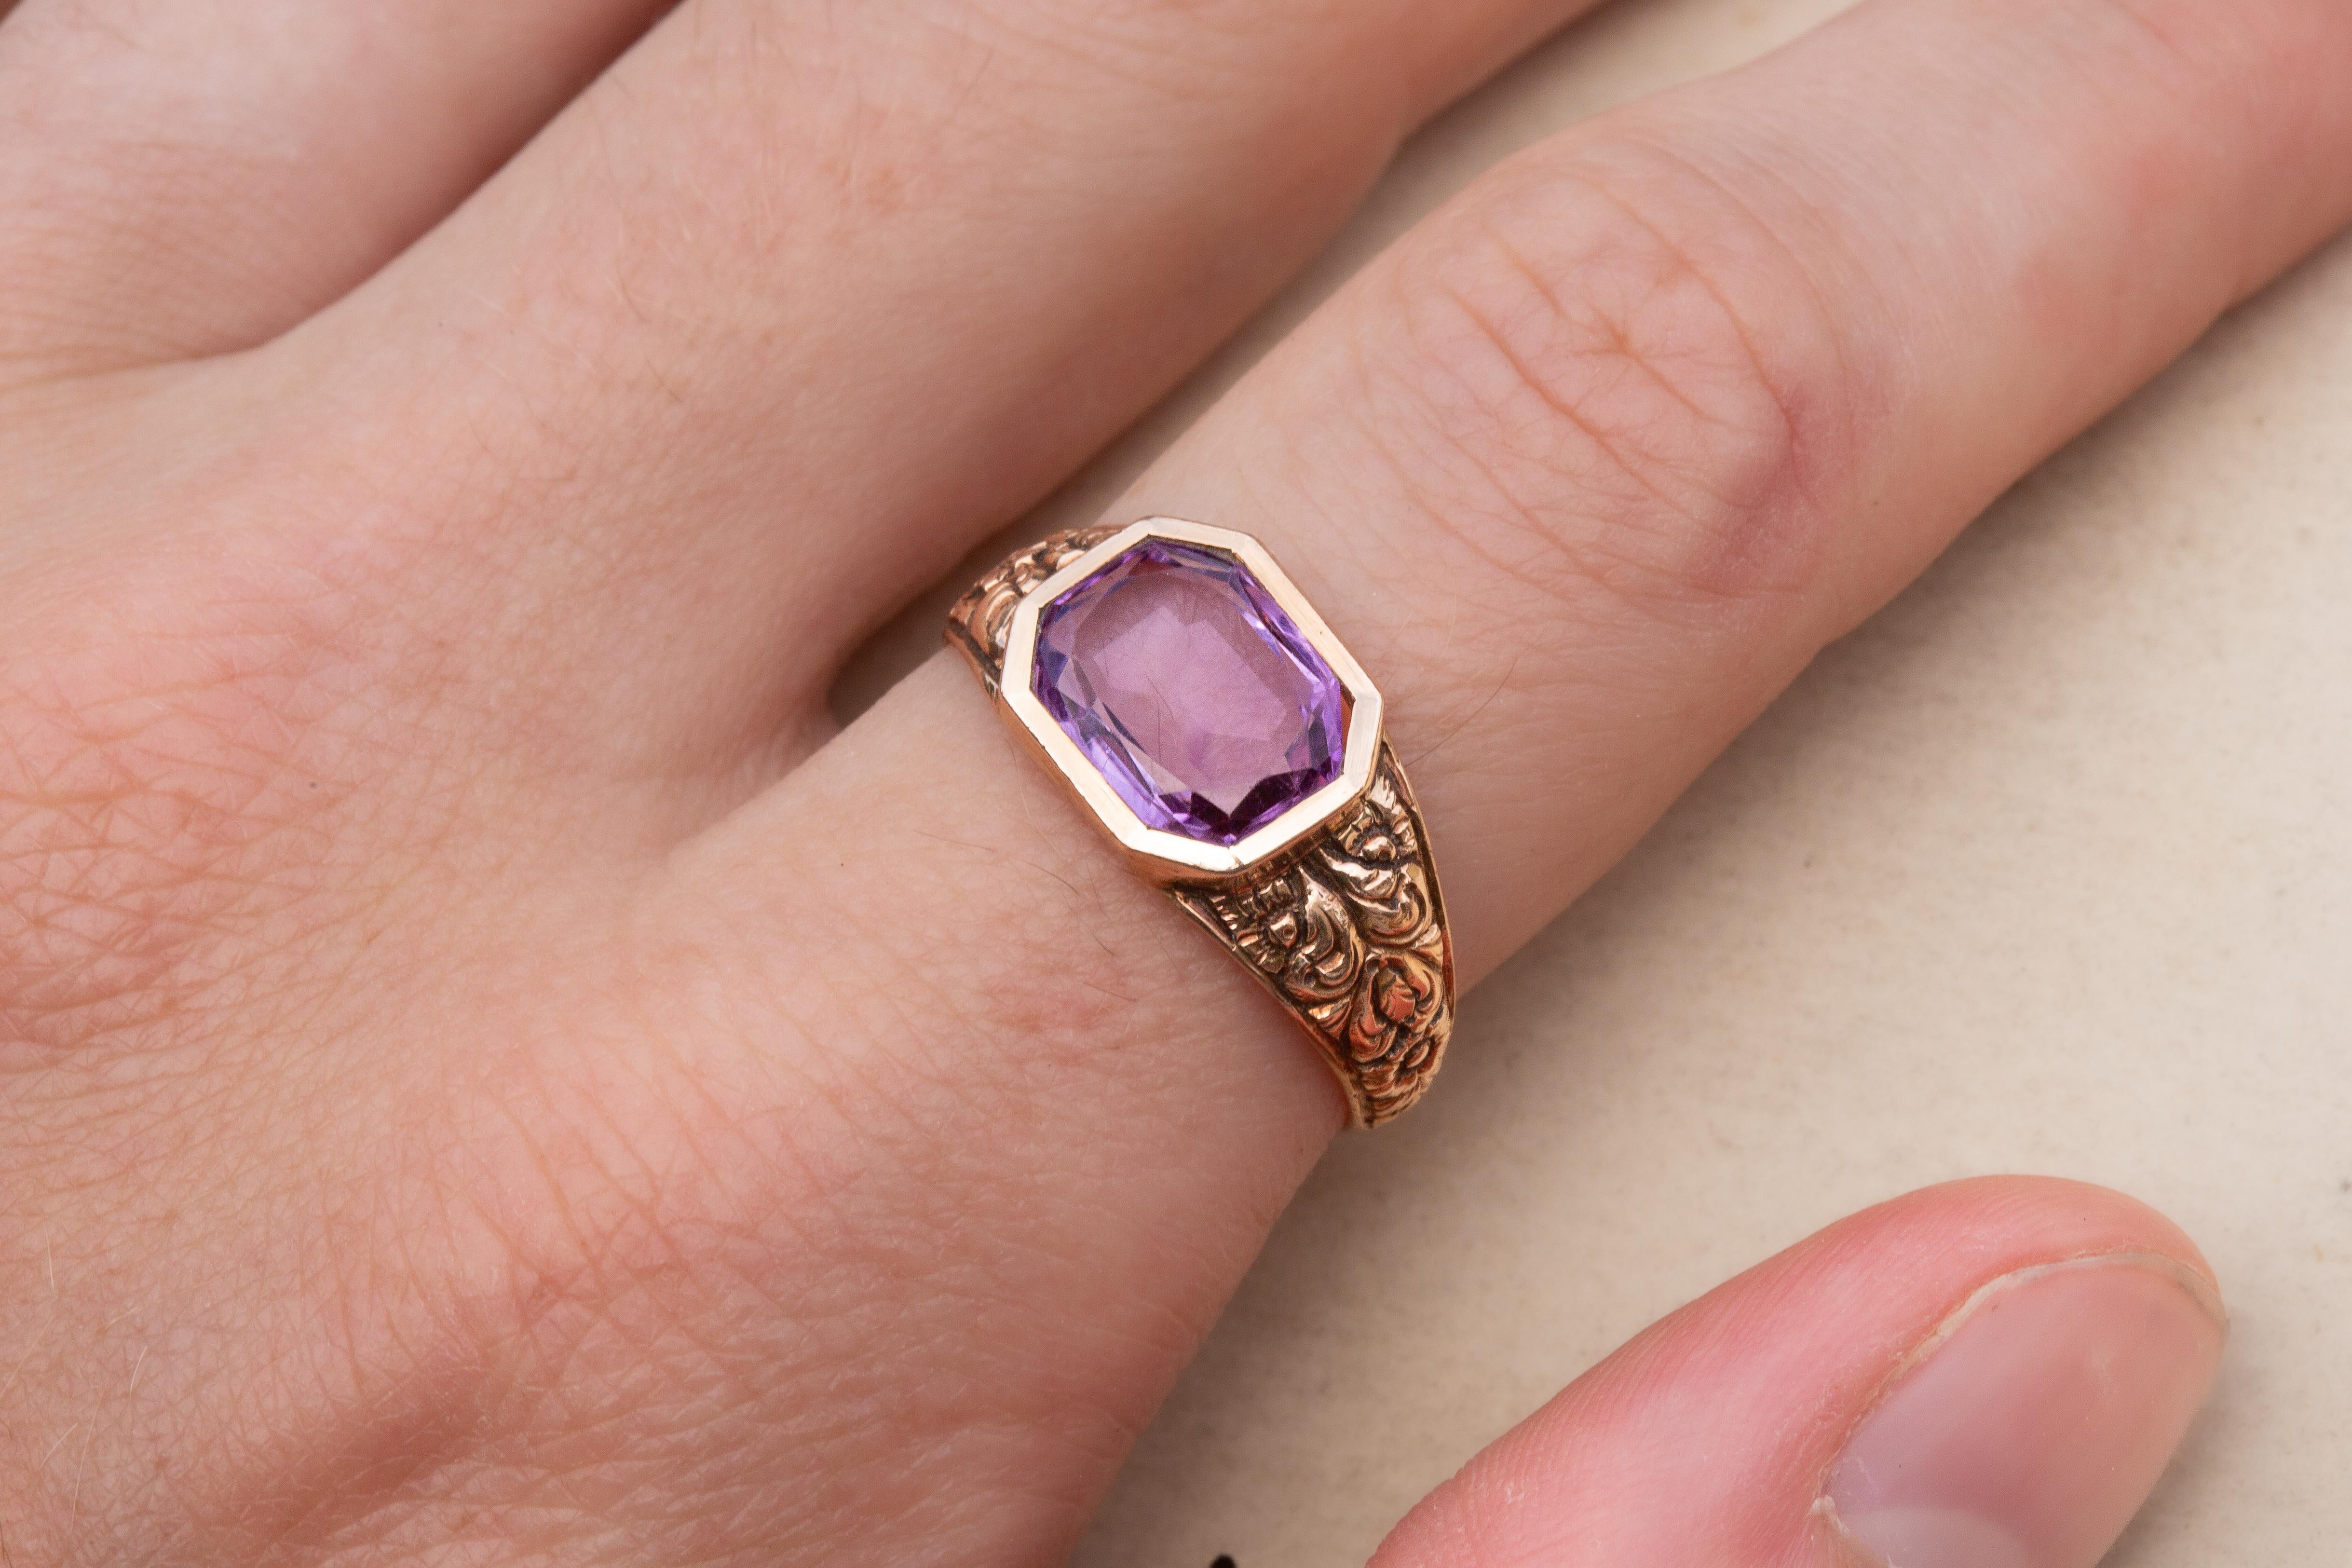 Stunning Antique Victorian 19th Century 14k Gold and Amethyst Ring 6